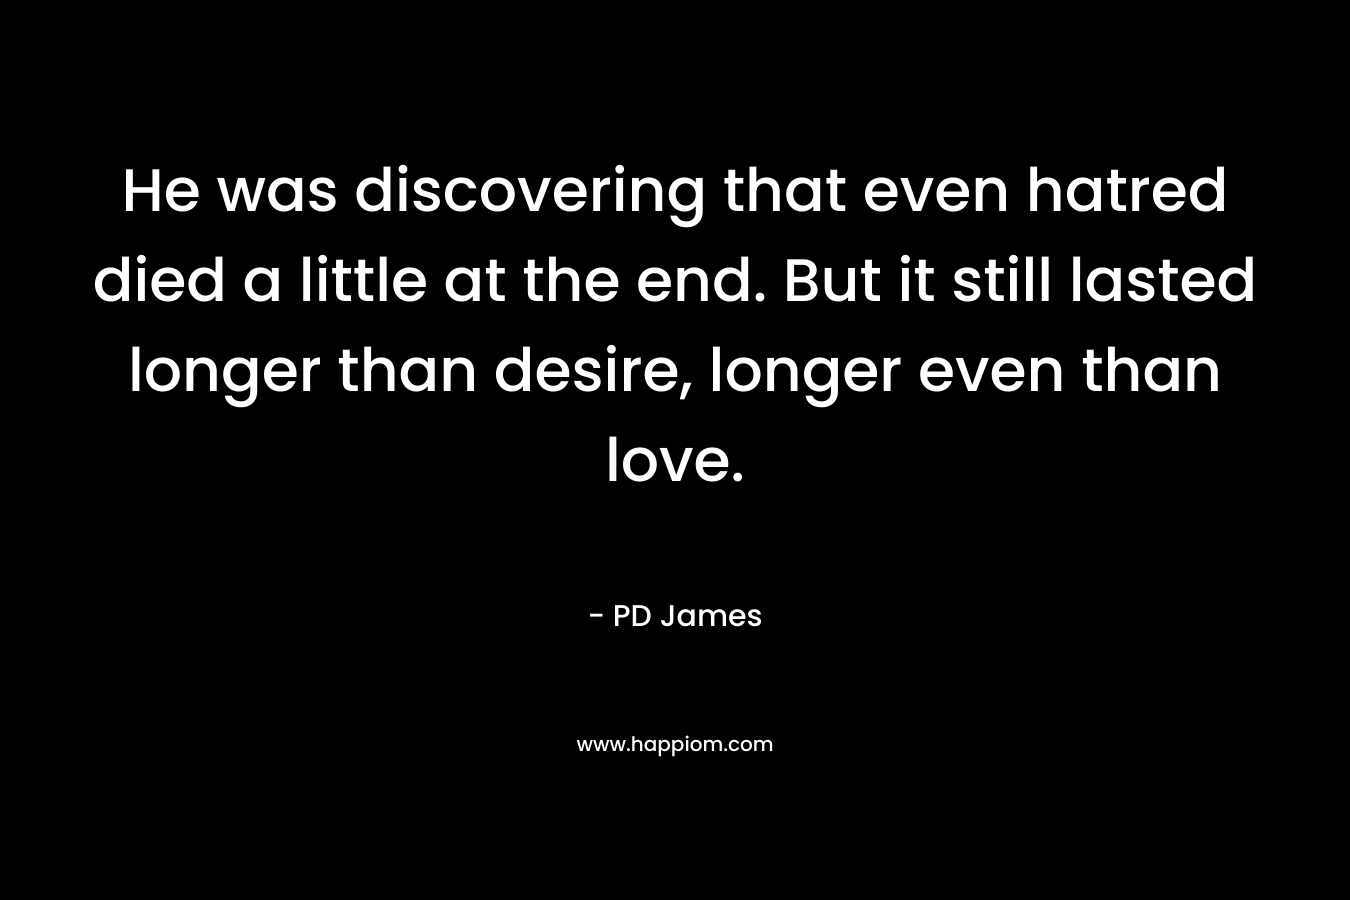 He was discovering that even hatred died a little at the end. But it still lasted longer than desire, longer even than love. – PD James